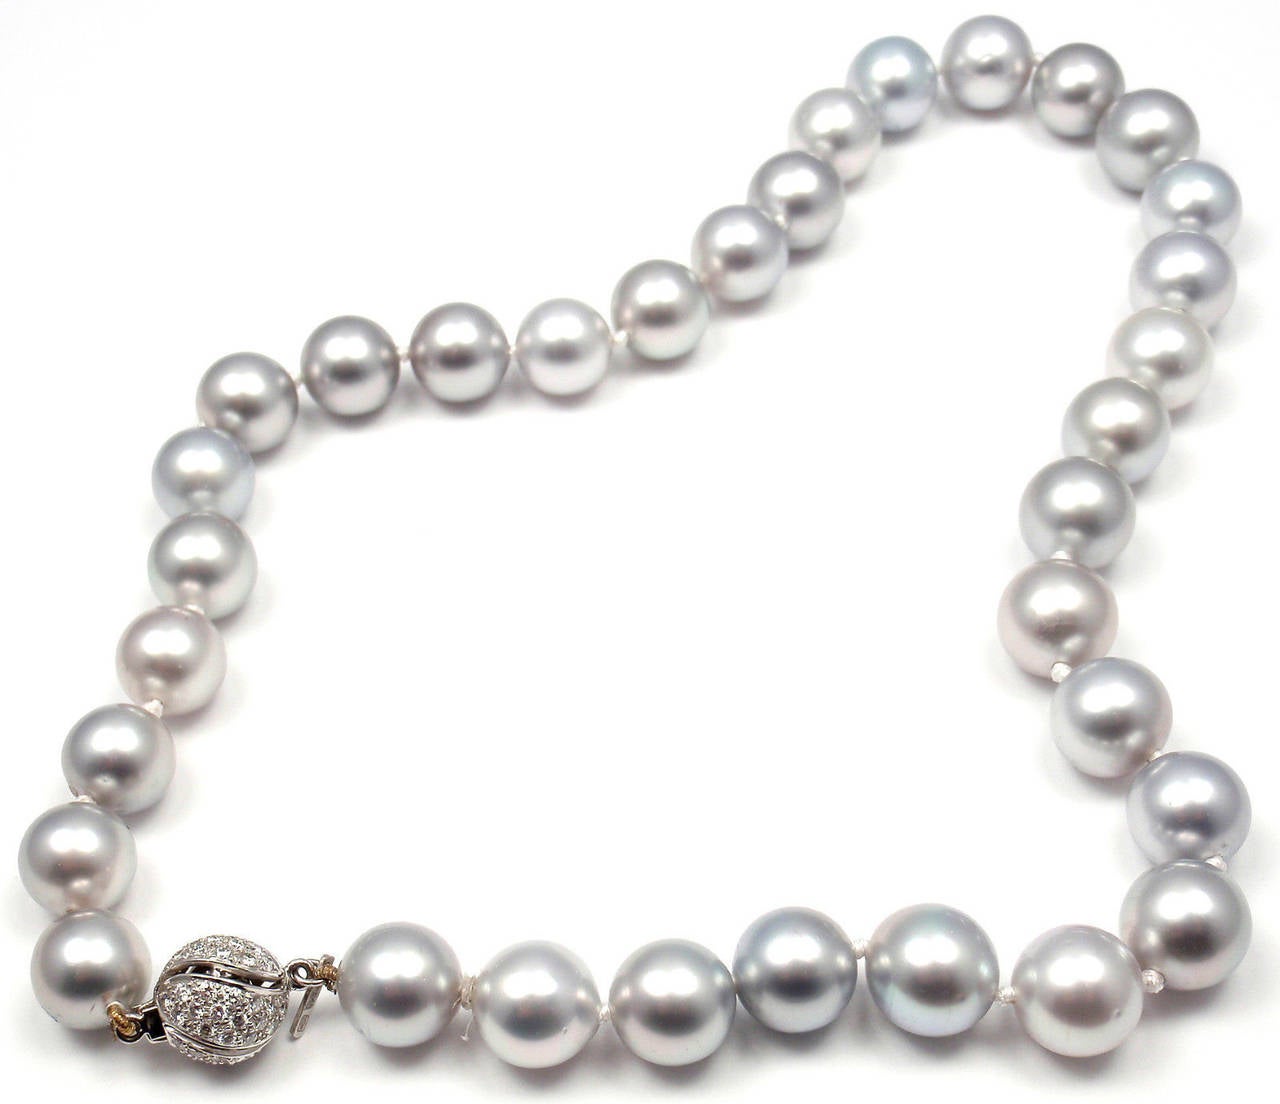 18k White Gold & Platinum Diamond One Strand Pearl Necklace by Harry Winston. 
With 33 Tahitian Cultured pearls from 10mm - 12mm in diameter on a 16